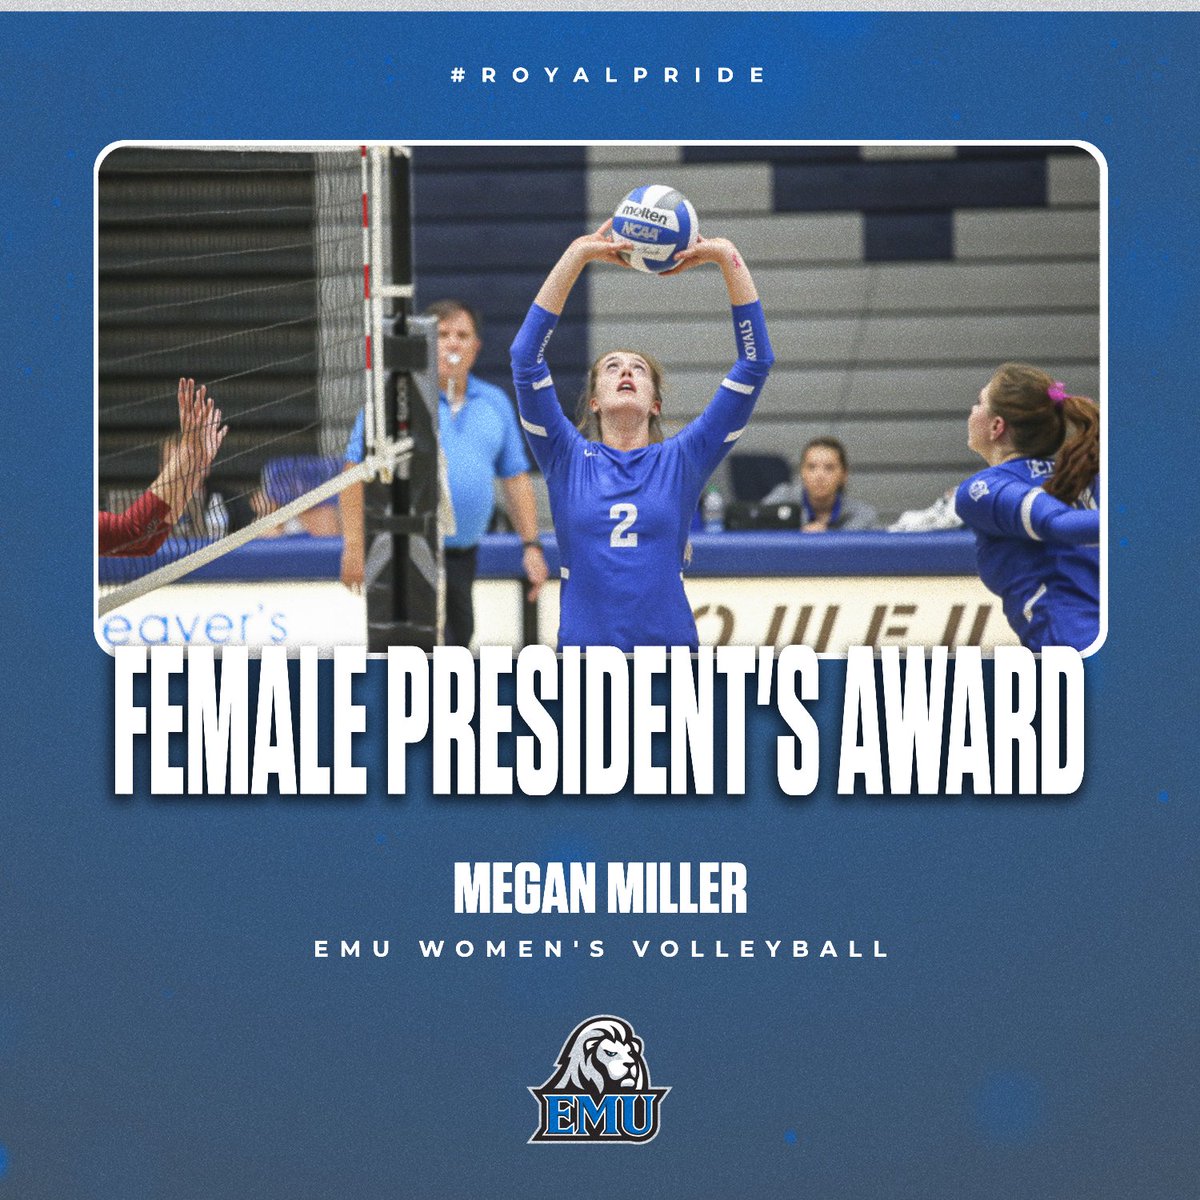 To round out the week, we want to 𝐂𝐎𝐍𝐆𝐑𝐀𝐓𝐔𝐋𝐀𝐓𝐄 our 2023-24 President's Award winners, Megan Miller of @emu_wvb and Ariel Bonilla from @EmuMensSoccer! 📰bit.ly/3UtYAPF #CompeteTogether | #RoyalPride